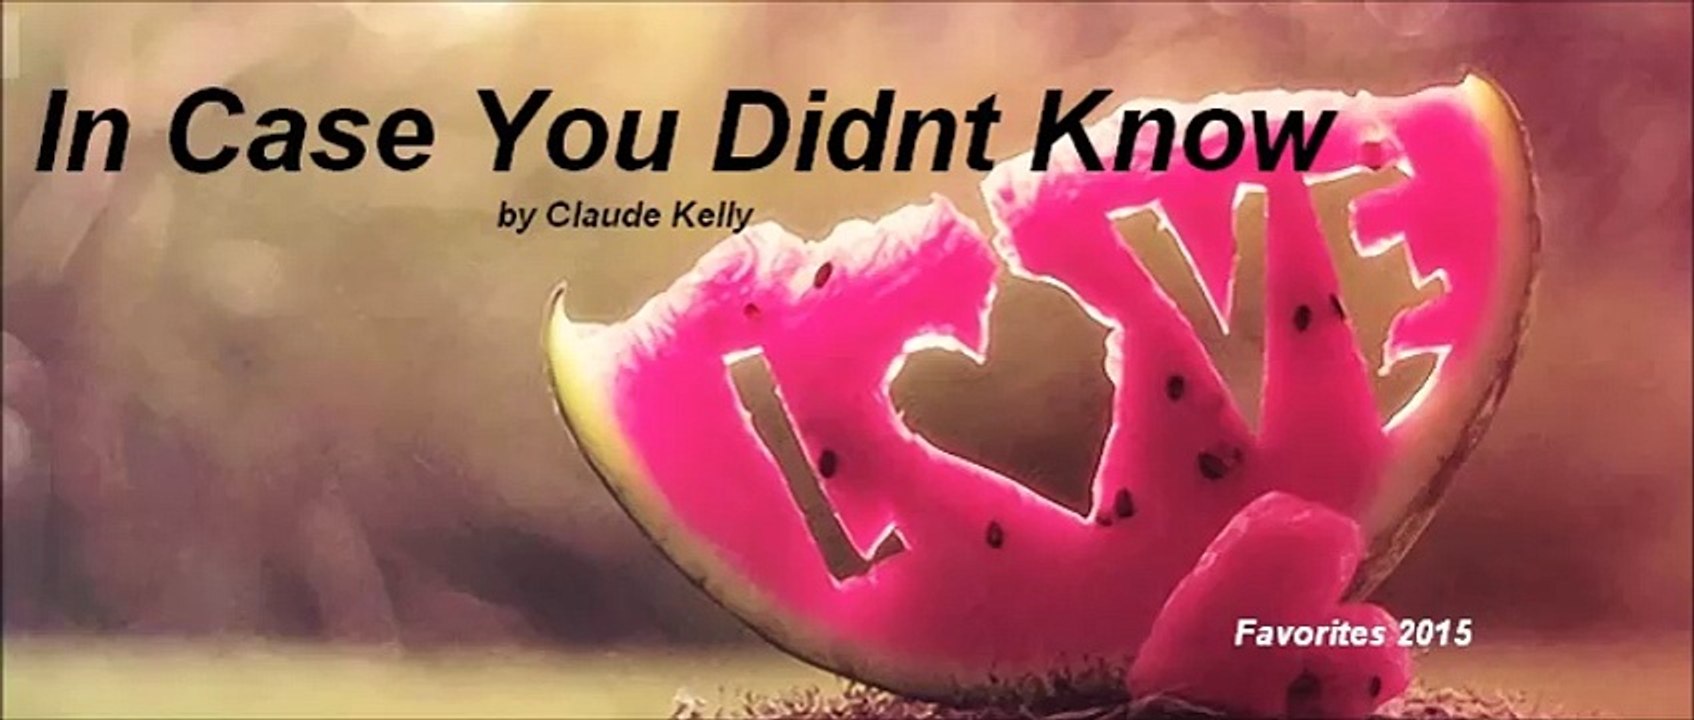 In Case You Didnt Know by Claude Kelly (Favorites 2015)